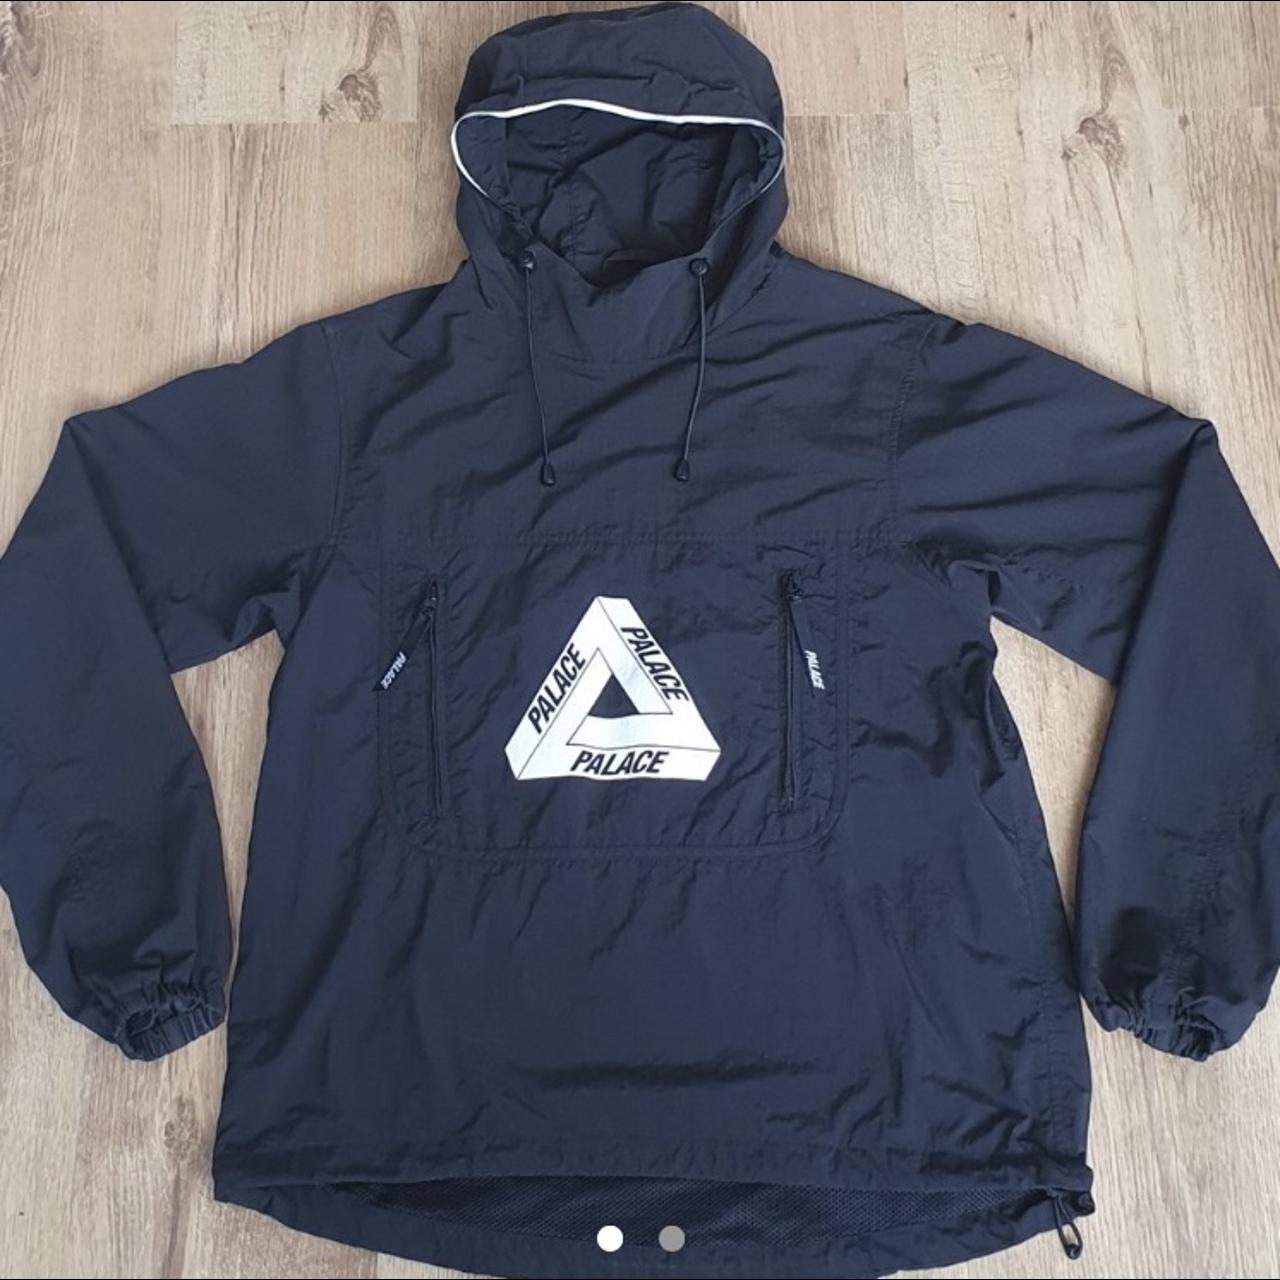 Palace Over Park Shell Top Black., Rare piece and a...